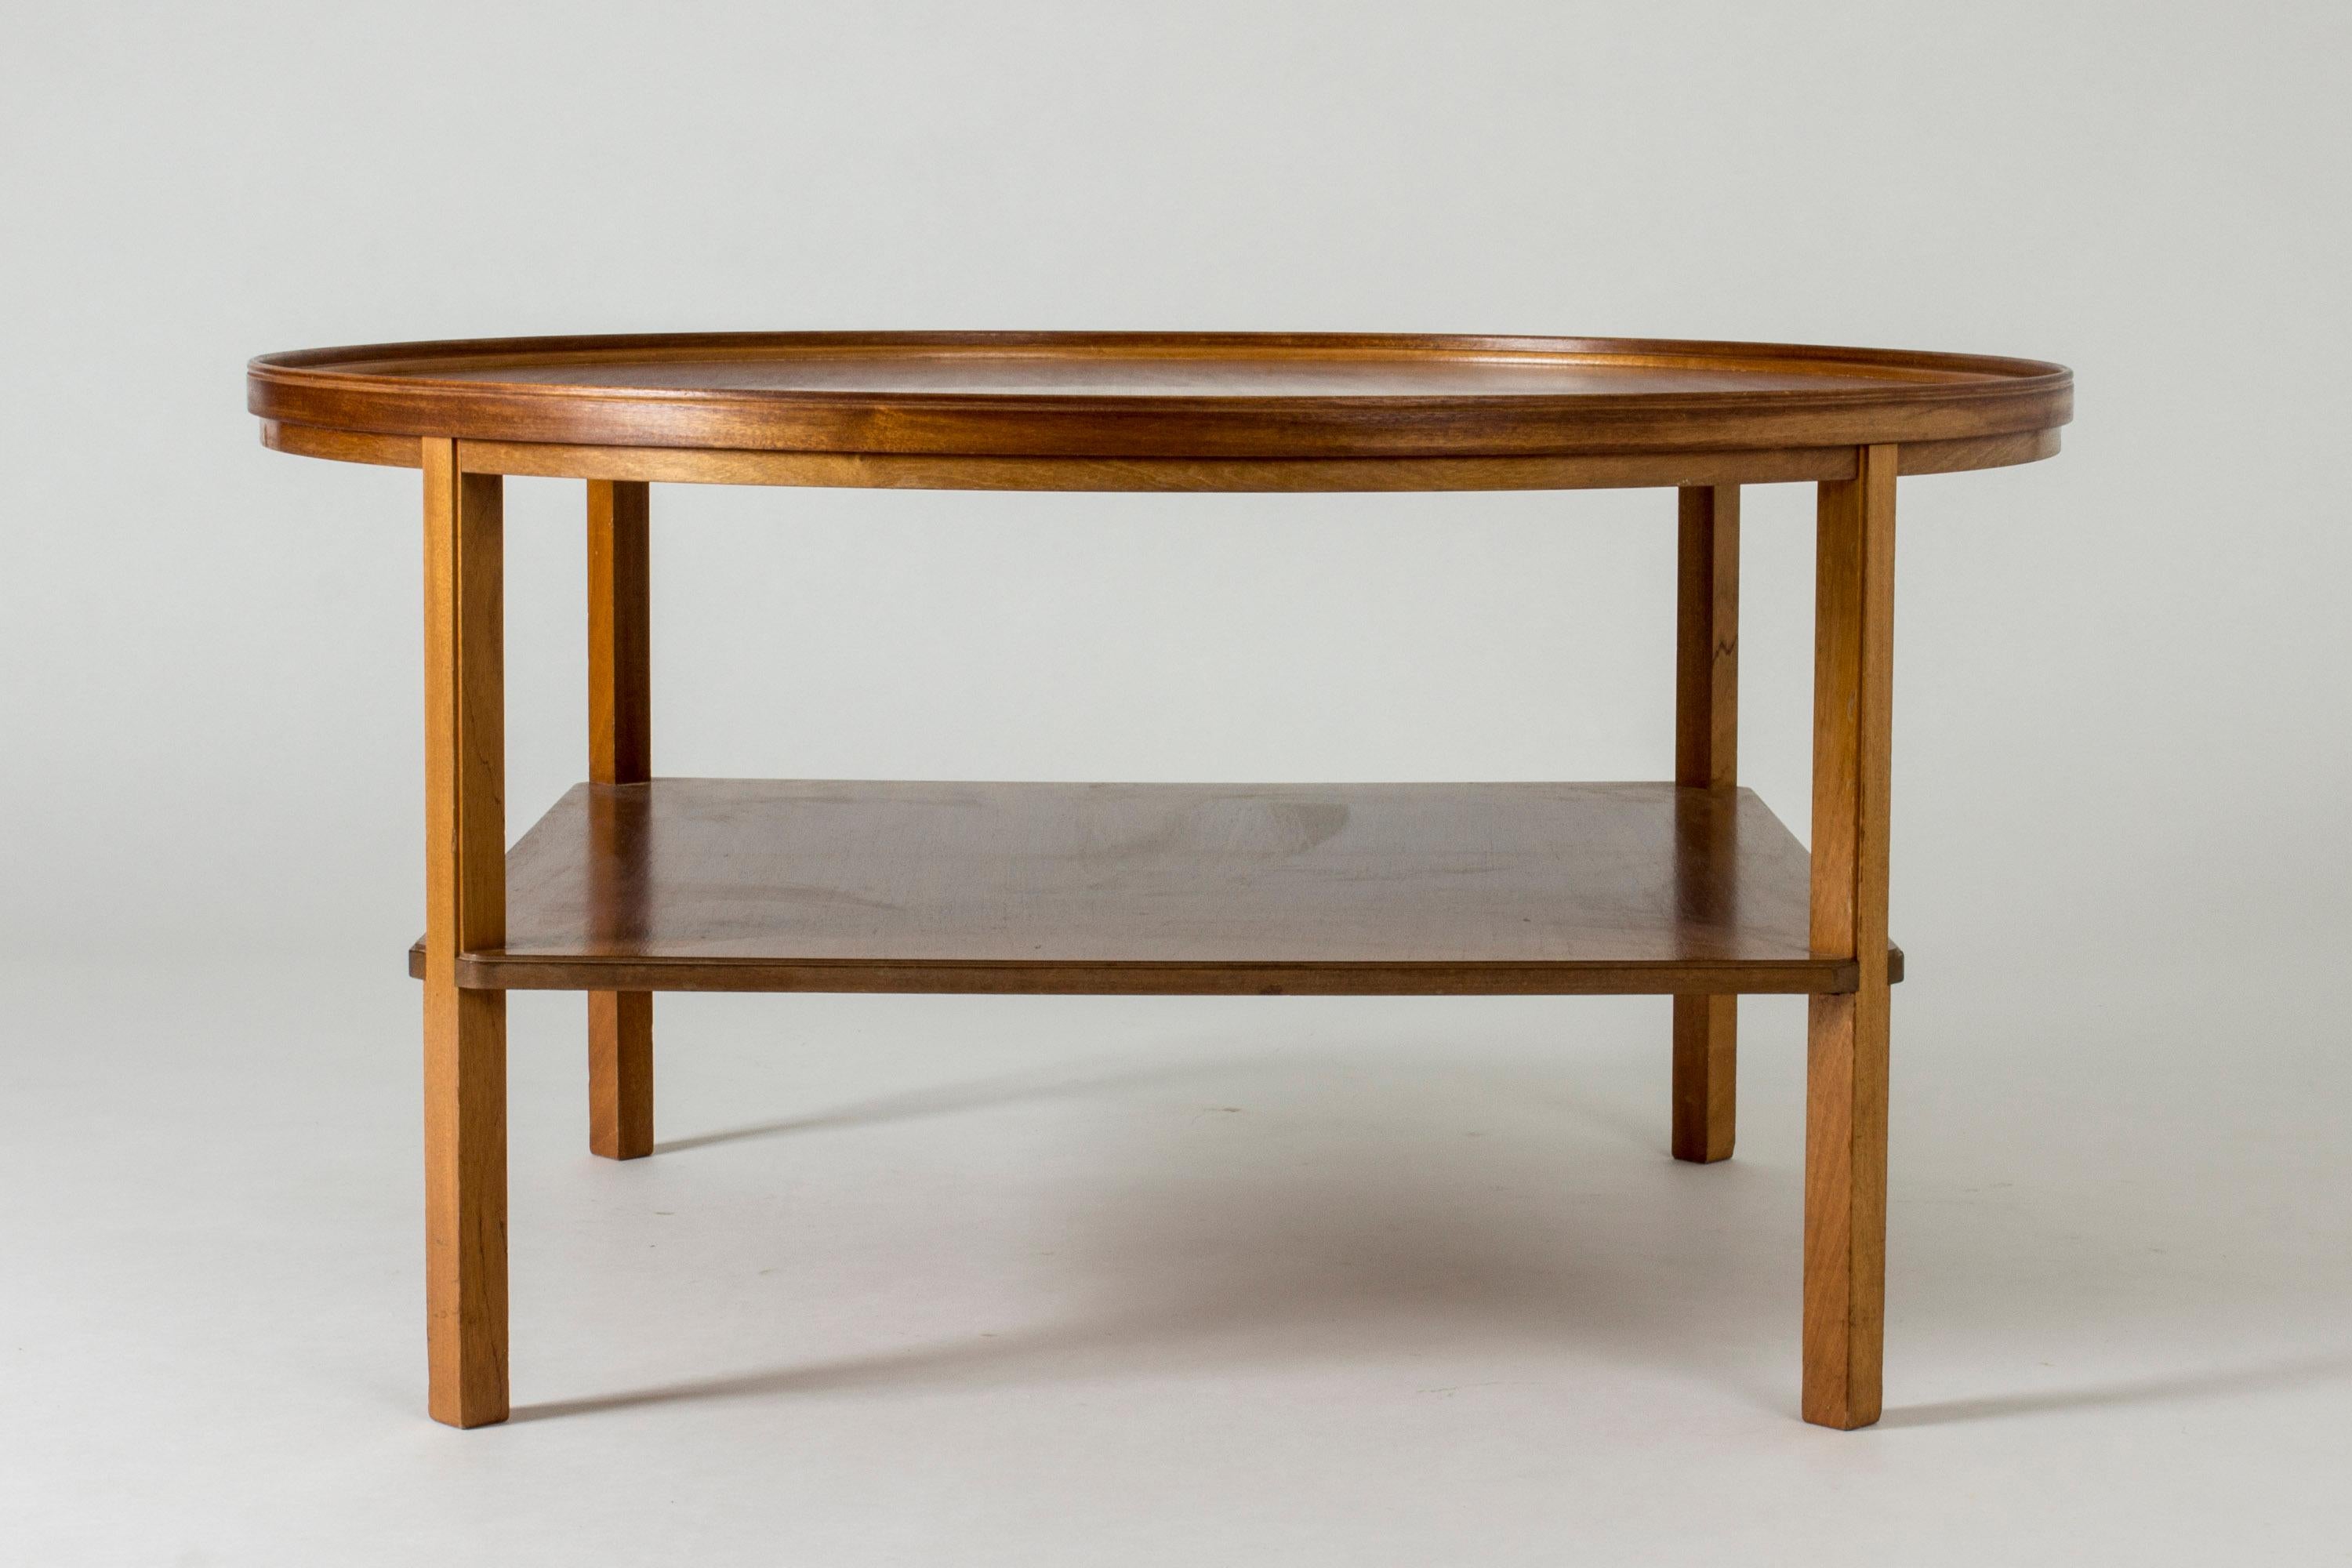 Round mahogany coffee table by Kaare Klint, model 6687, designed in 1929. Timeless and elegant with neat subtle details like the fitting of the legs into the lower shelf and the rim around the table top.